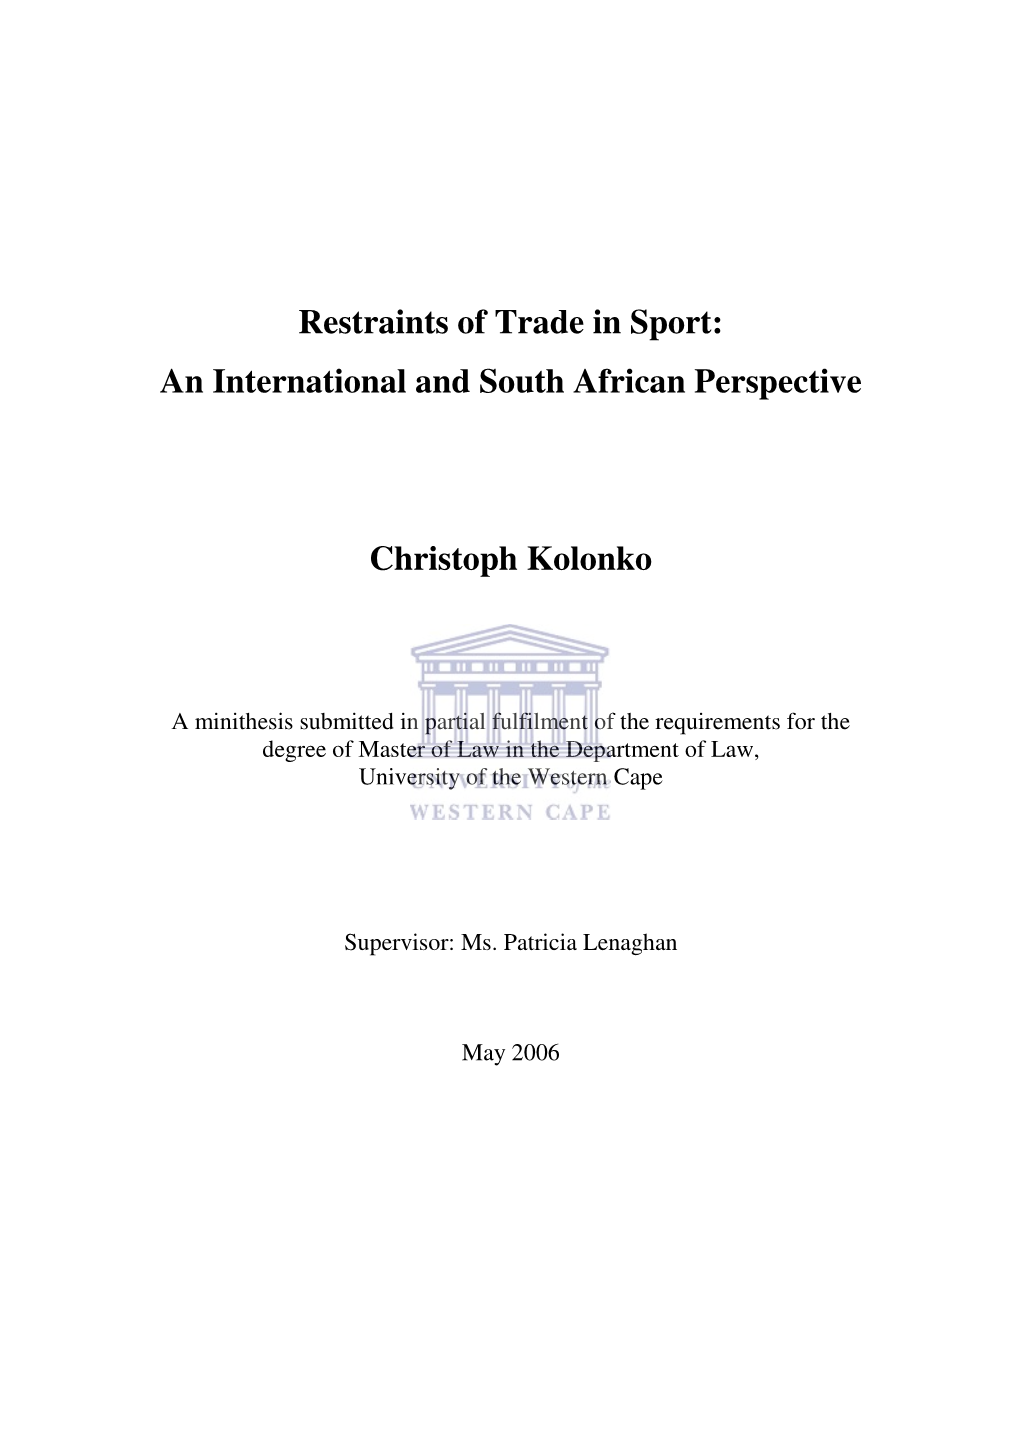 Restraints of Trade in Sport: an International and South African Perspective